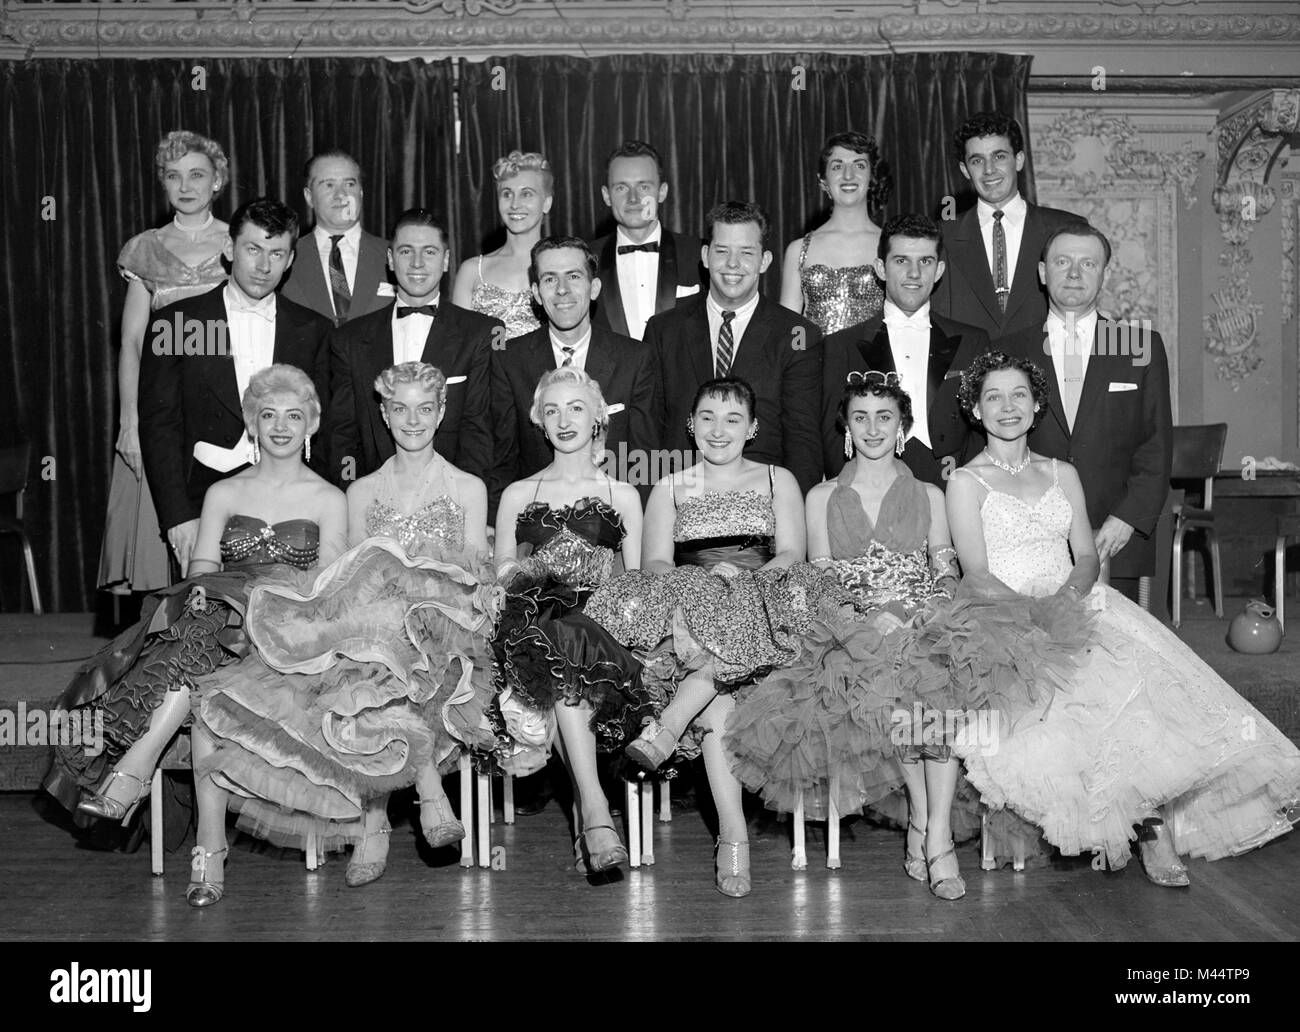 Group portrait of formally dressed partygoers in Chicago, ca. 1958. Stock Photo